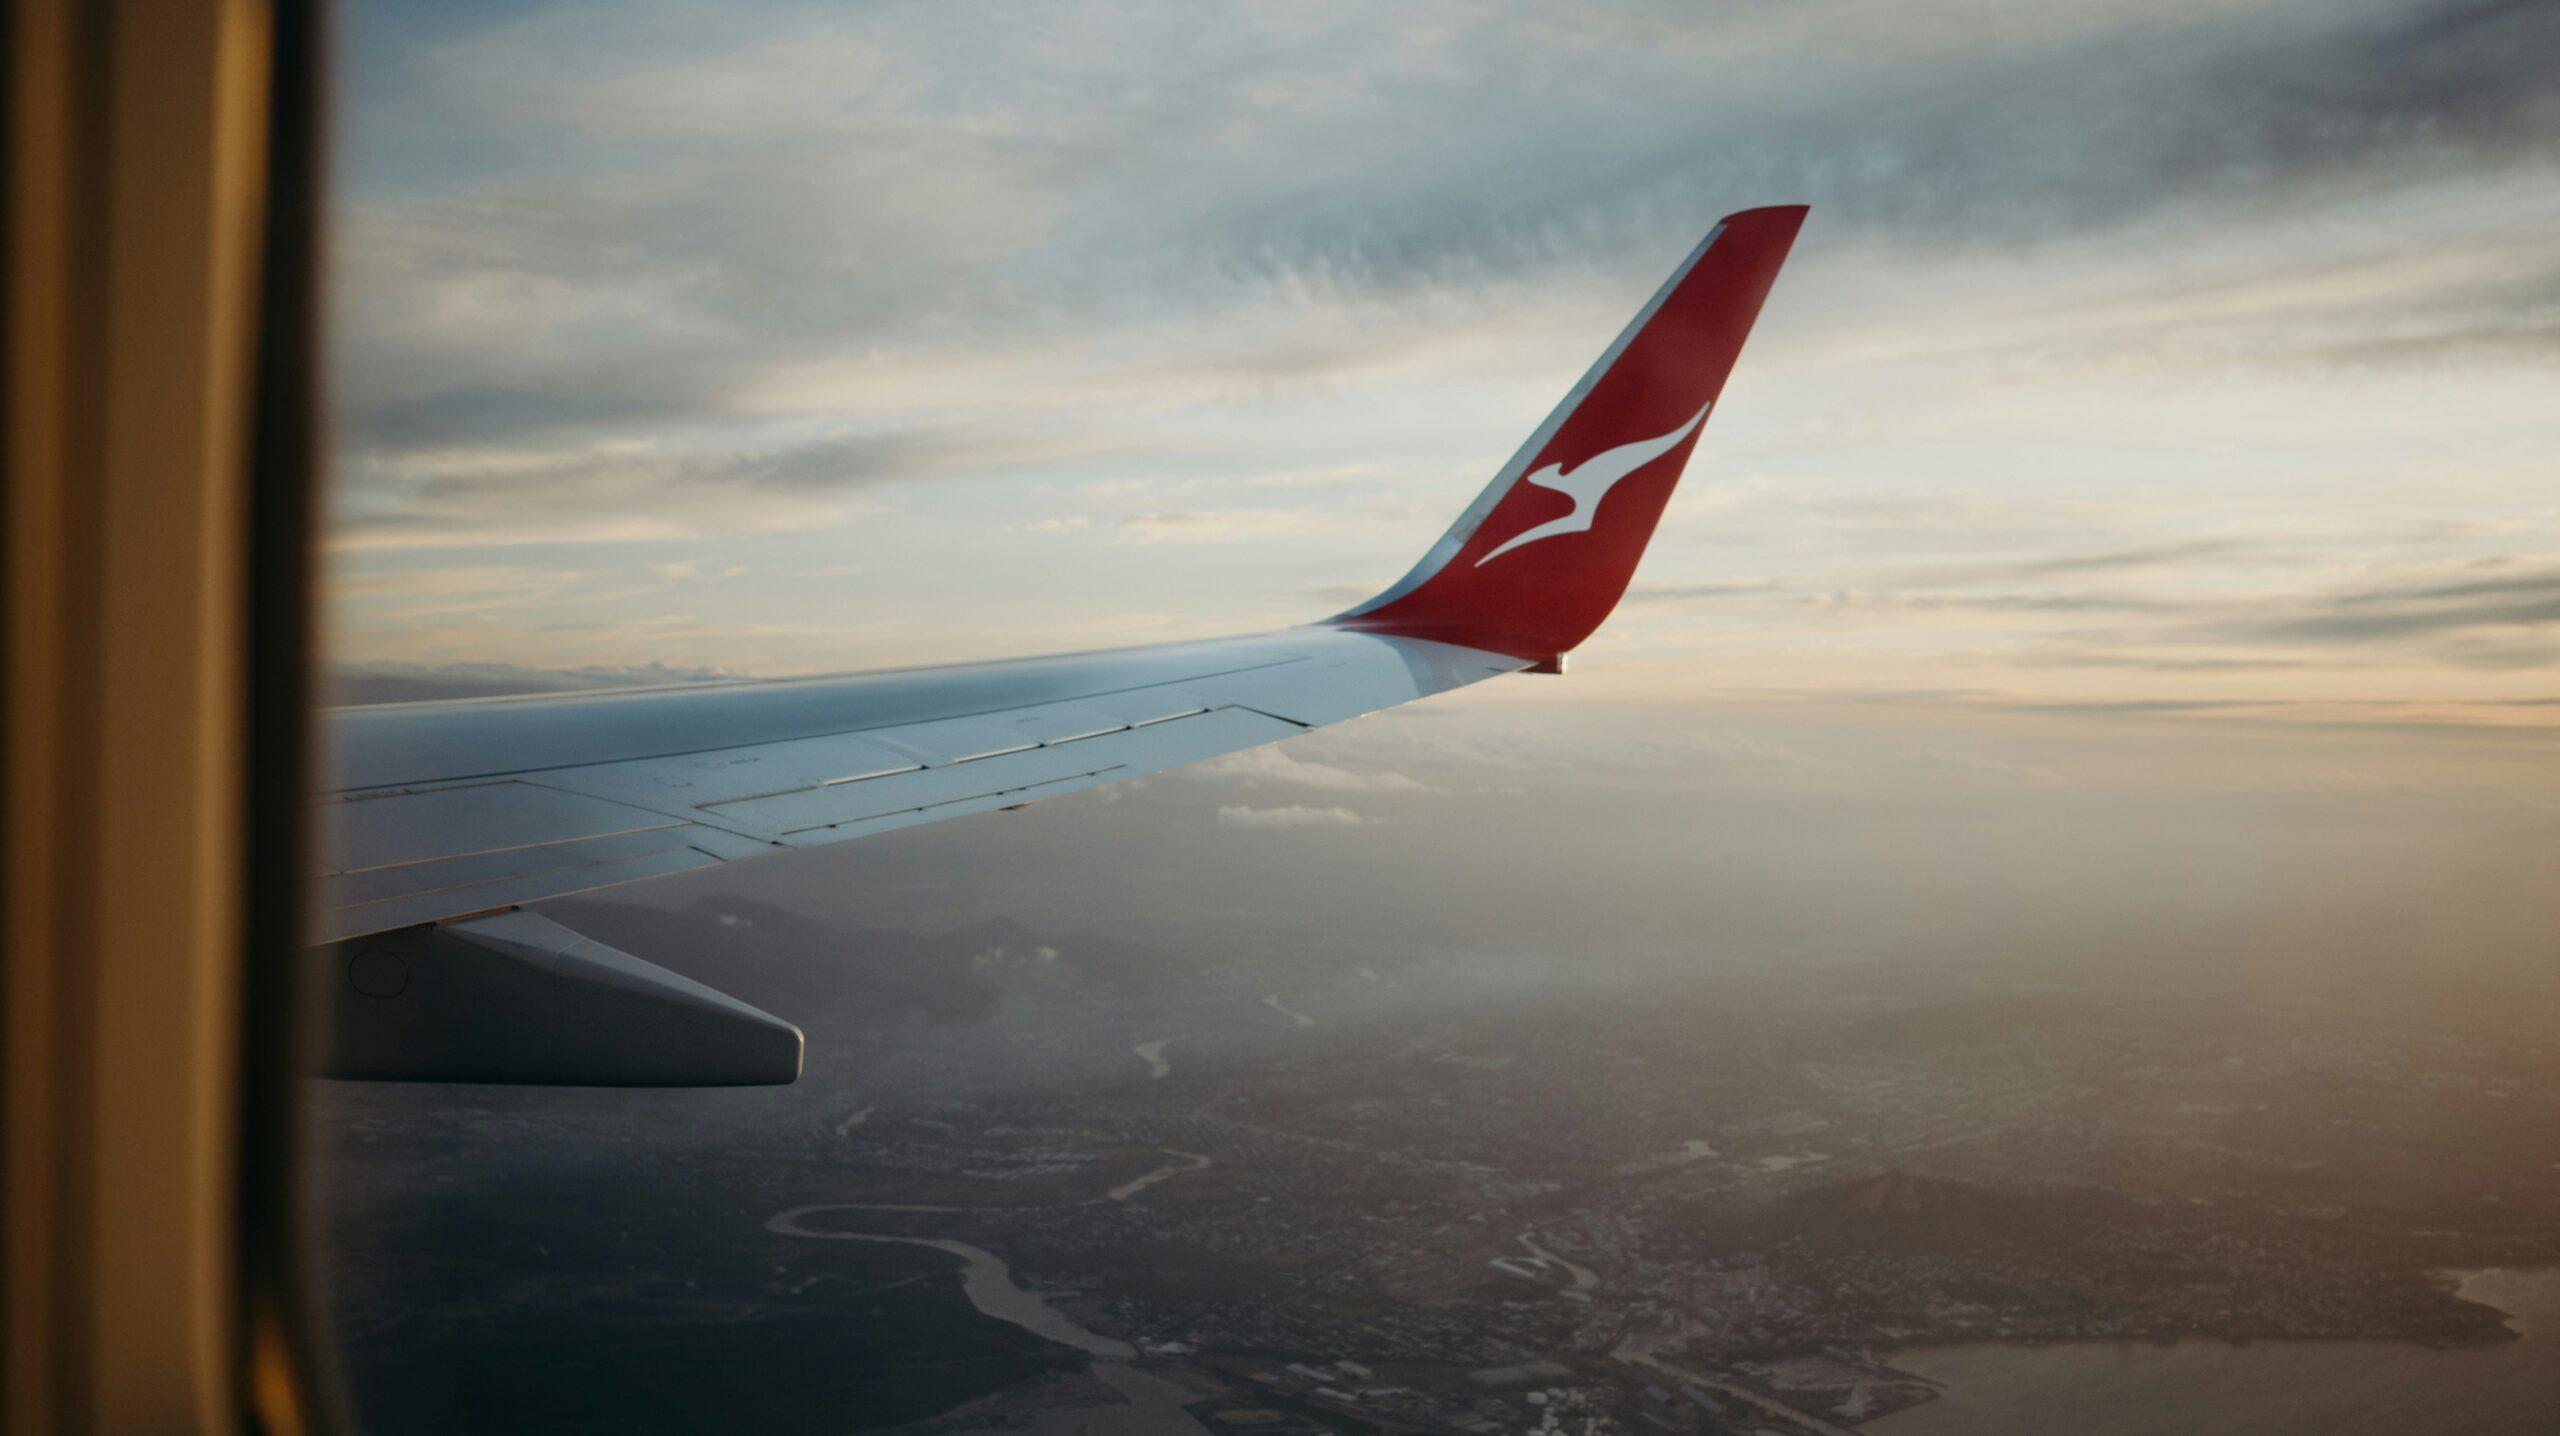 The wing of an air bound Qantas aeroplane backdropped by a colourful sky and overlooking an unidentified location. 